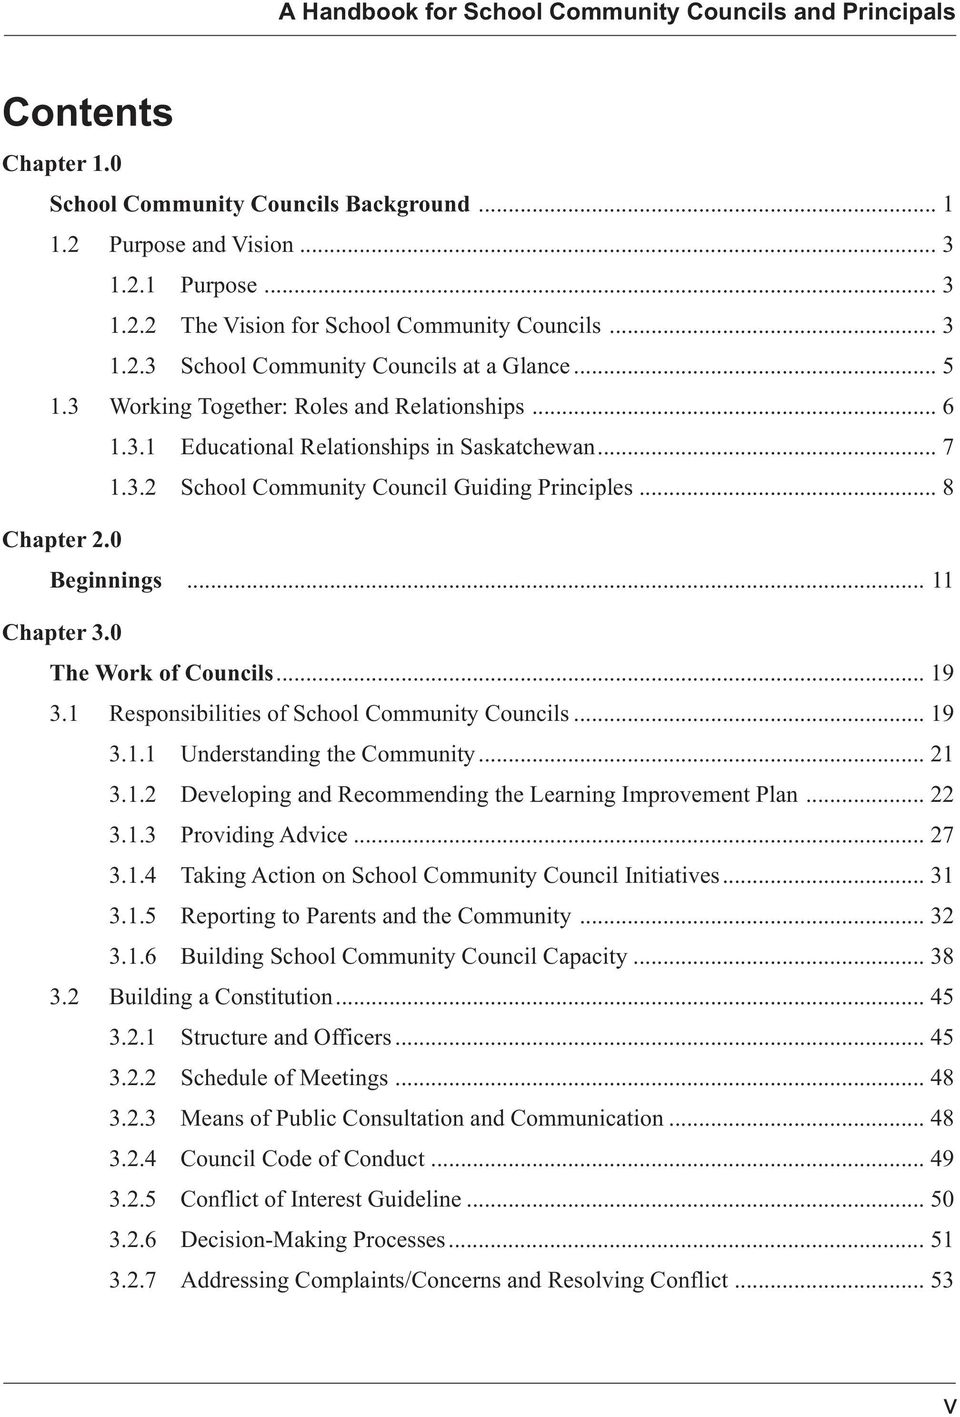 .. 8 Chapter 2.0 Beginnings... 11 Chapter 3.0 The Work of Councils... 19 3.1 Responsibilities of School Community Councils... 19 3.1.1 Understanding the Community... 21 3.1.2 Developing and Recommending the Learning Improvement Plan.